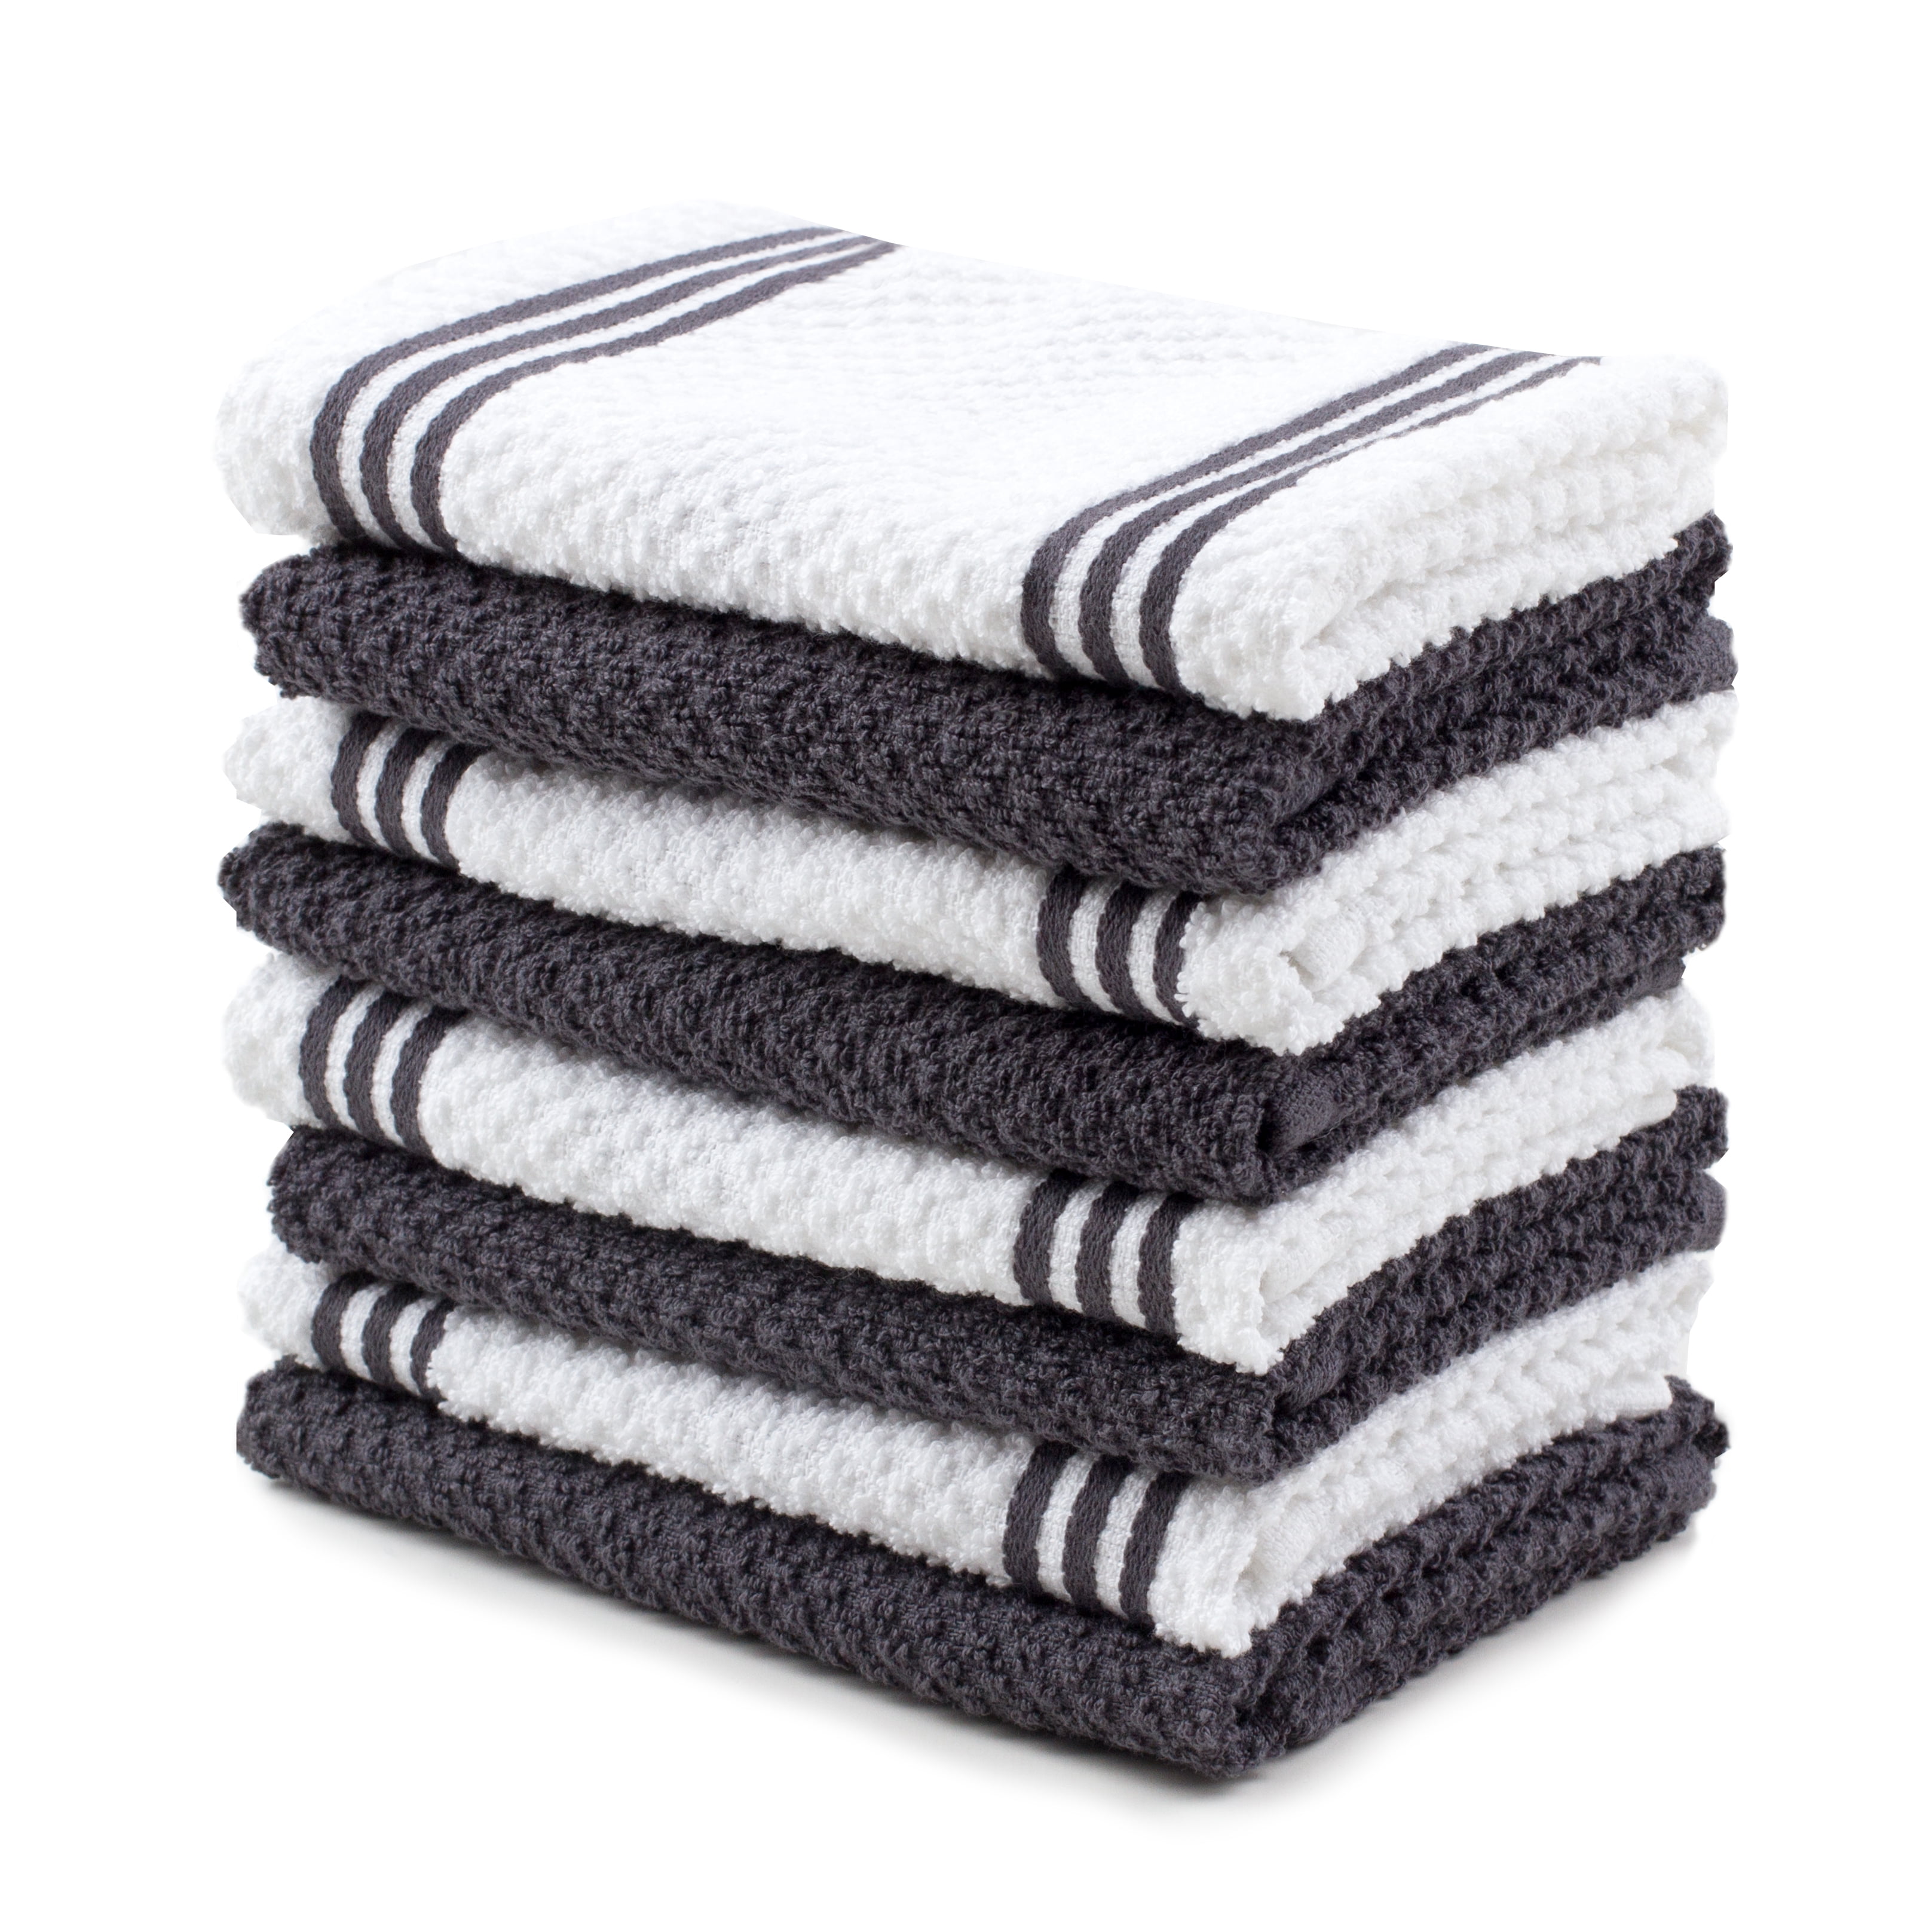 DISHCLOTHES 12"x12" 6,8,12,18,24 PIECES PER PACK 100%COTTON WASHCLOTH